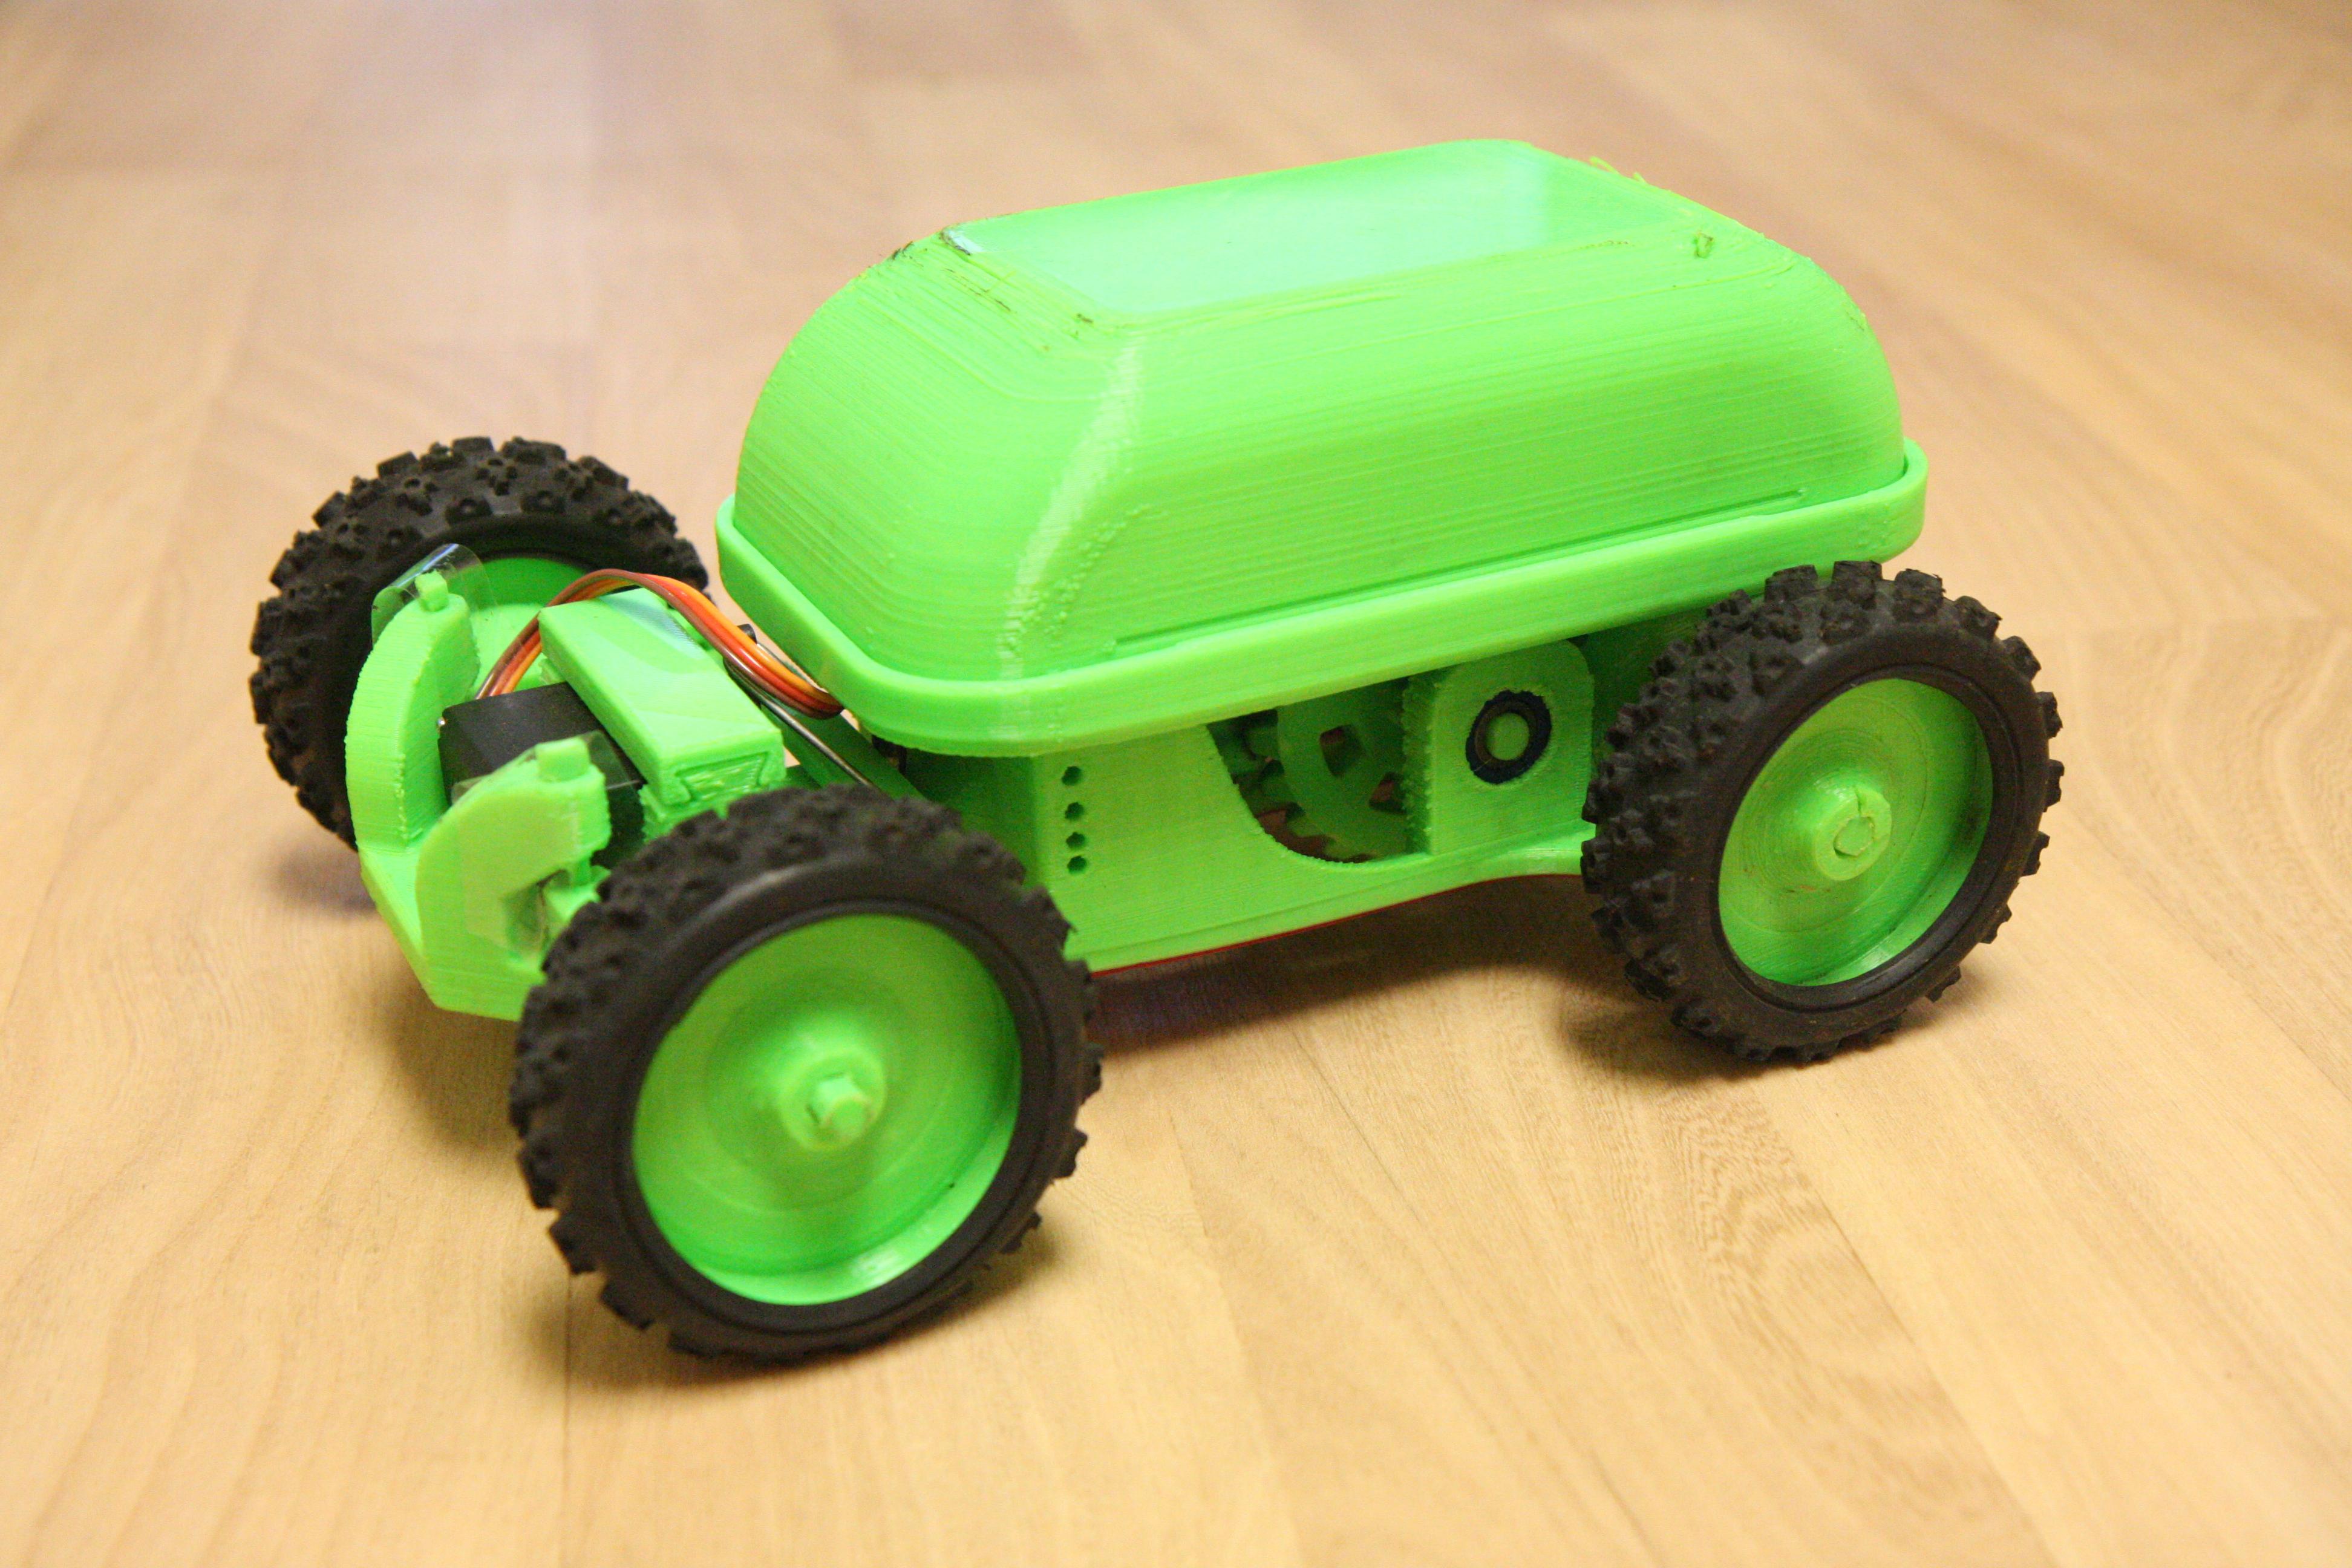 Screwless 3D Printable Remote Control Car Is Unveiled